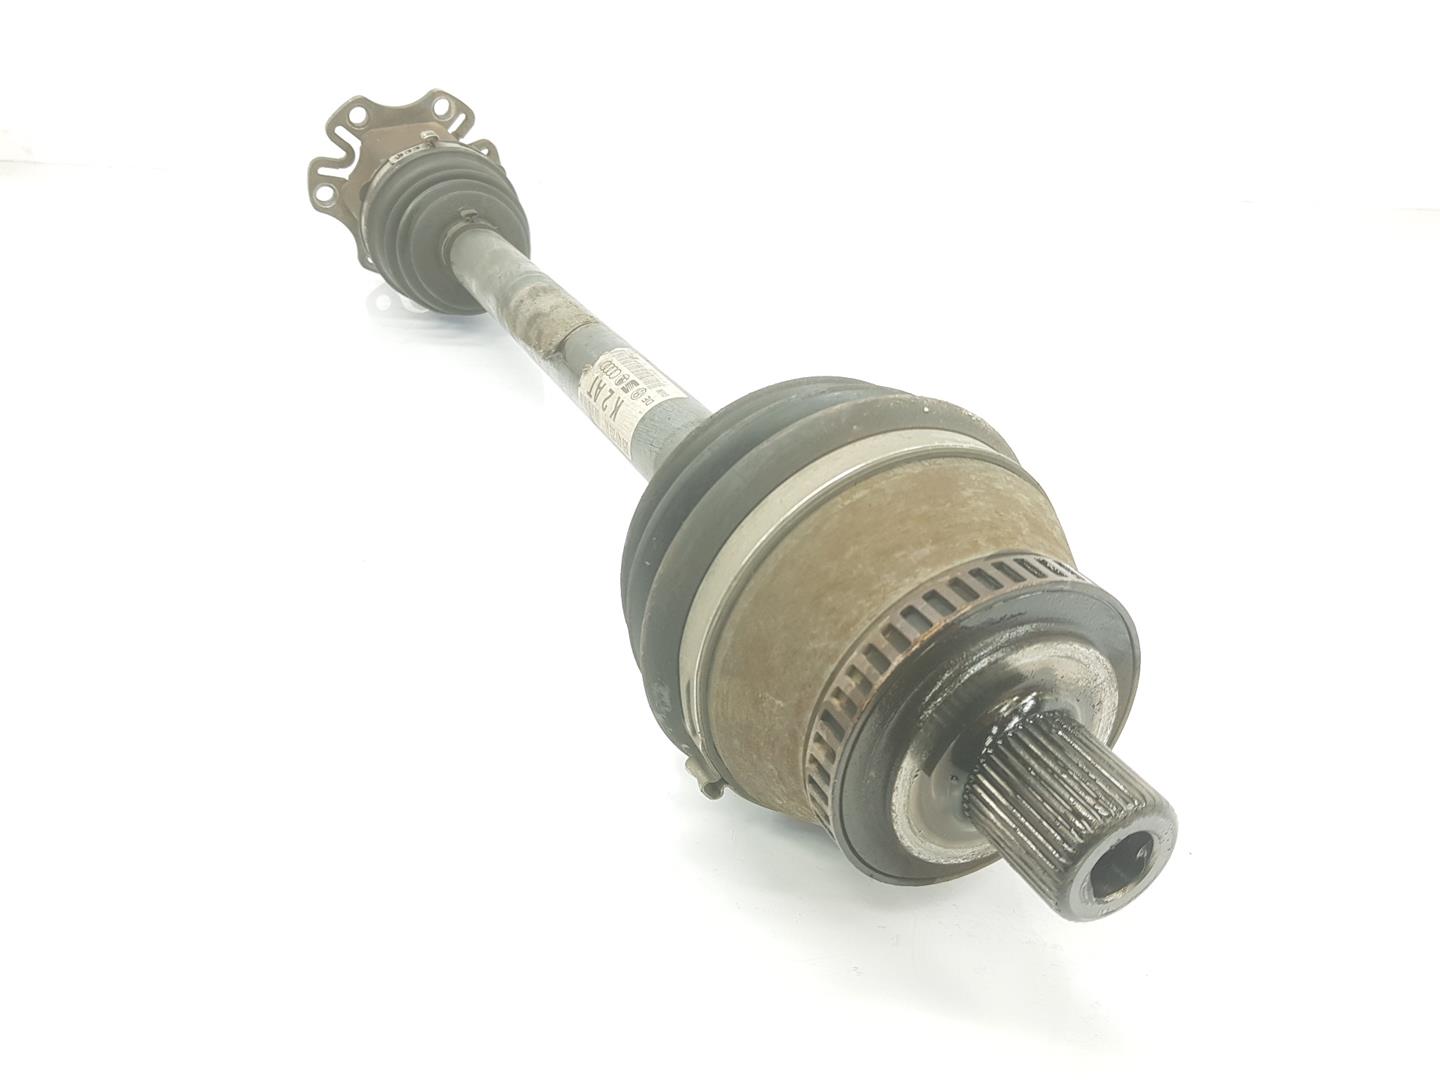 SEAT Exeo 1 generation (2009-2012) Front Right Driveshaft 8E0407272AT, 8E0407272AT 24220822